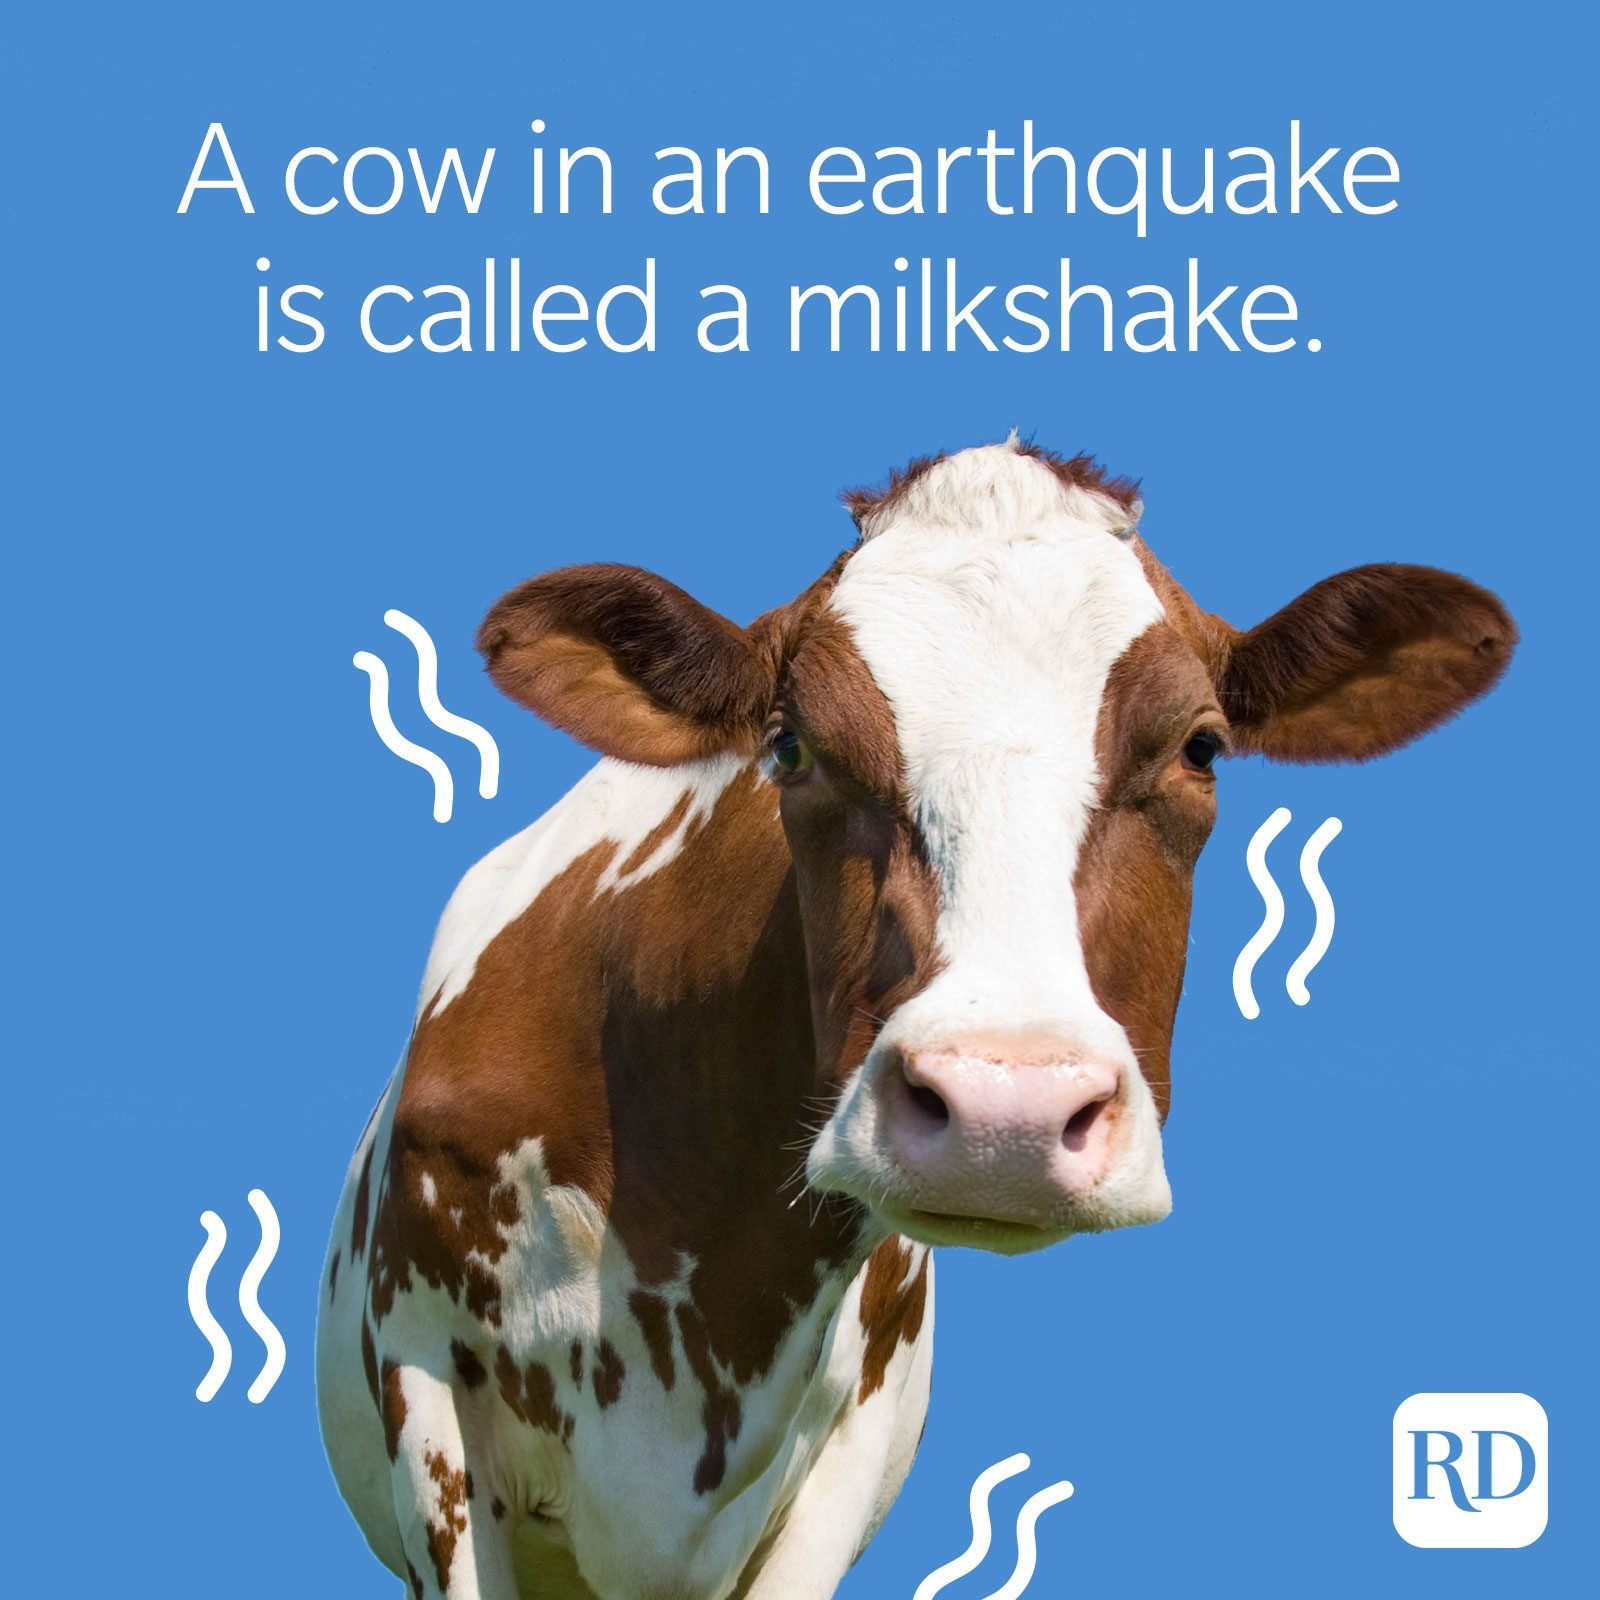 50 Cow Jokes That Are Udderly Hilarious | Reader's Digest